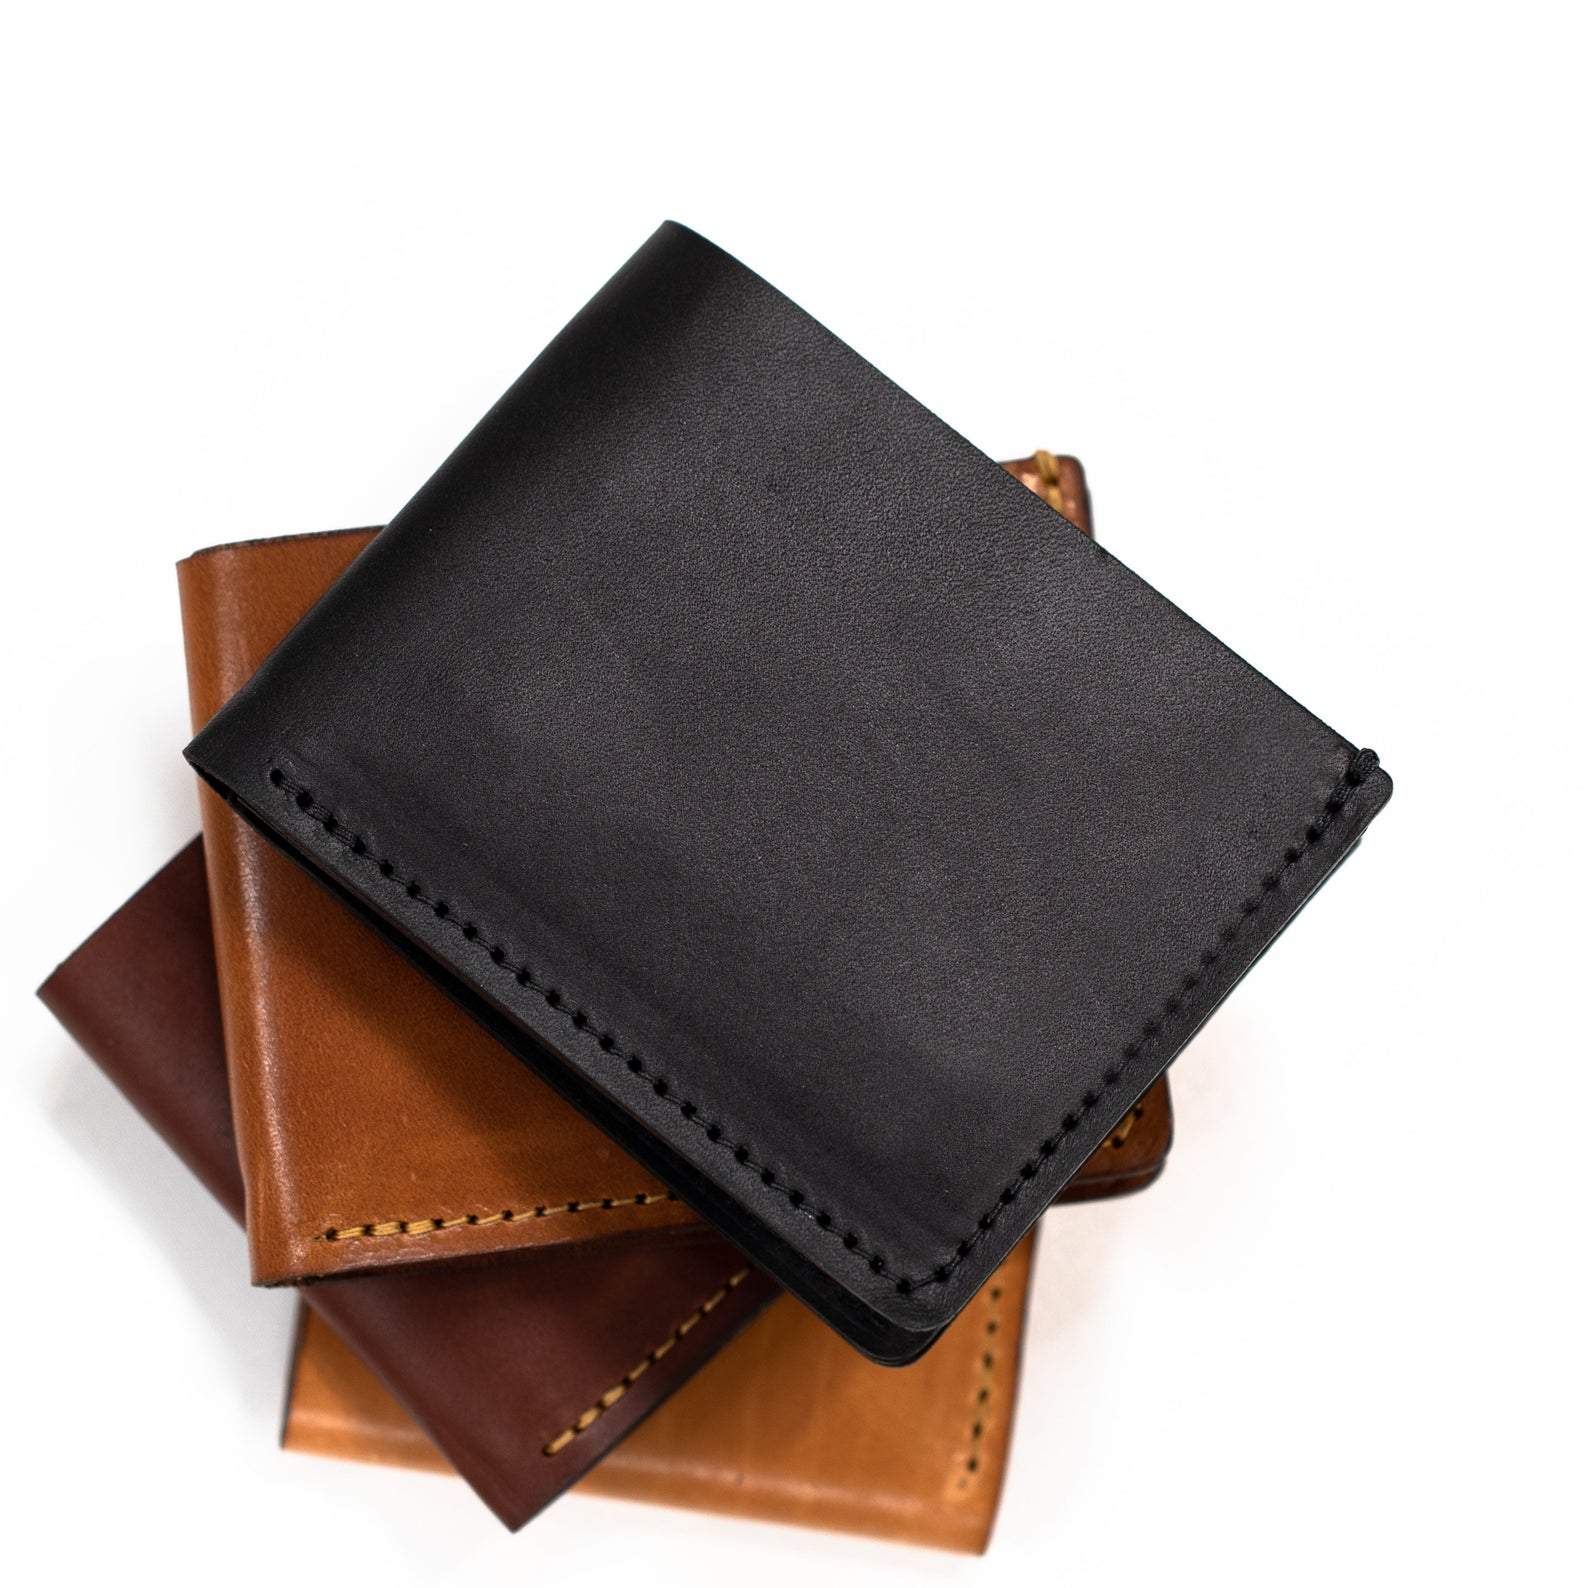  Bowman Bifold Wallet by Lifetime Leather Co Lifetime Leather Co Perfumarie